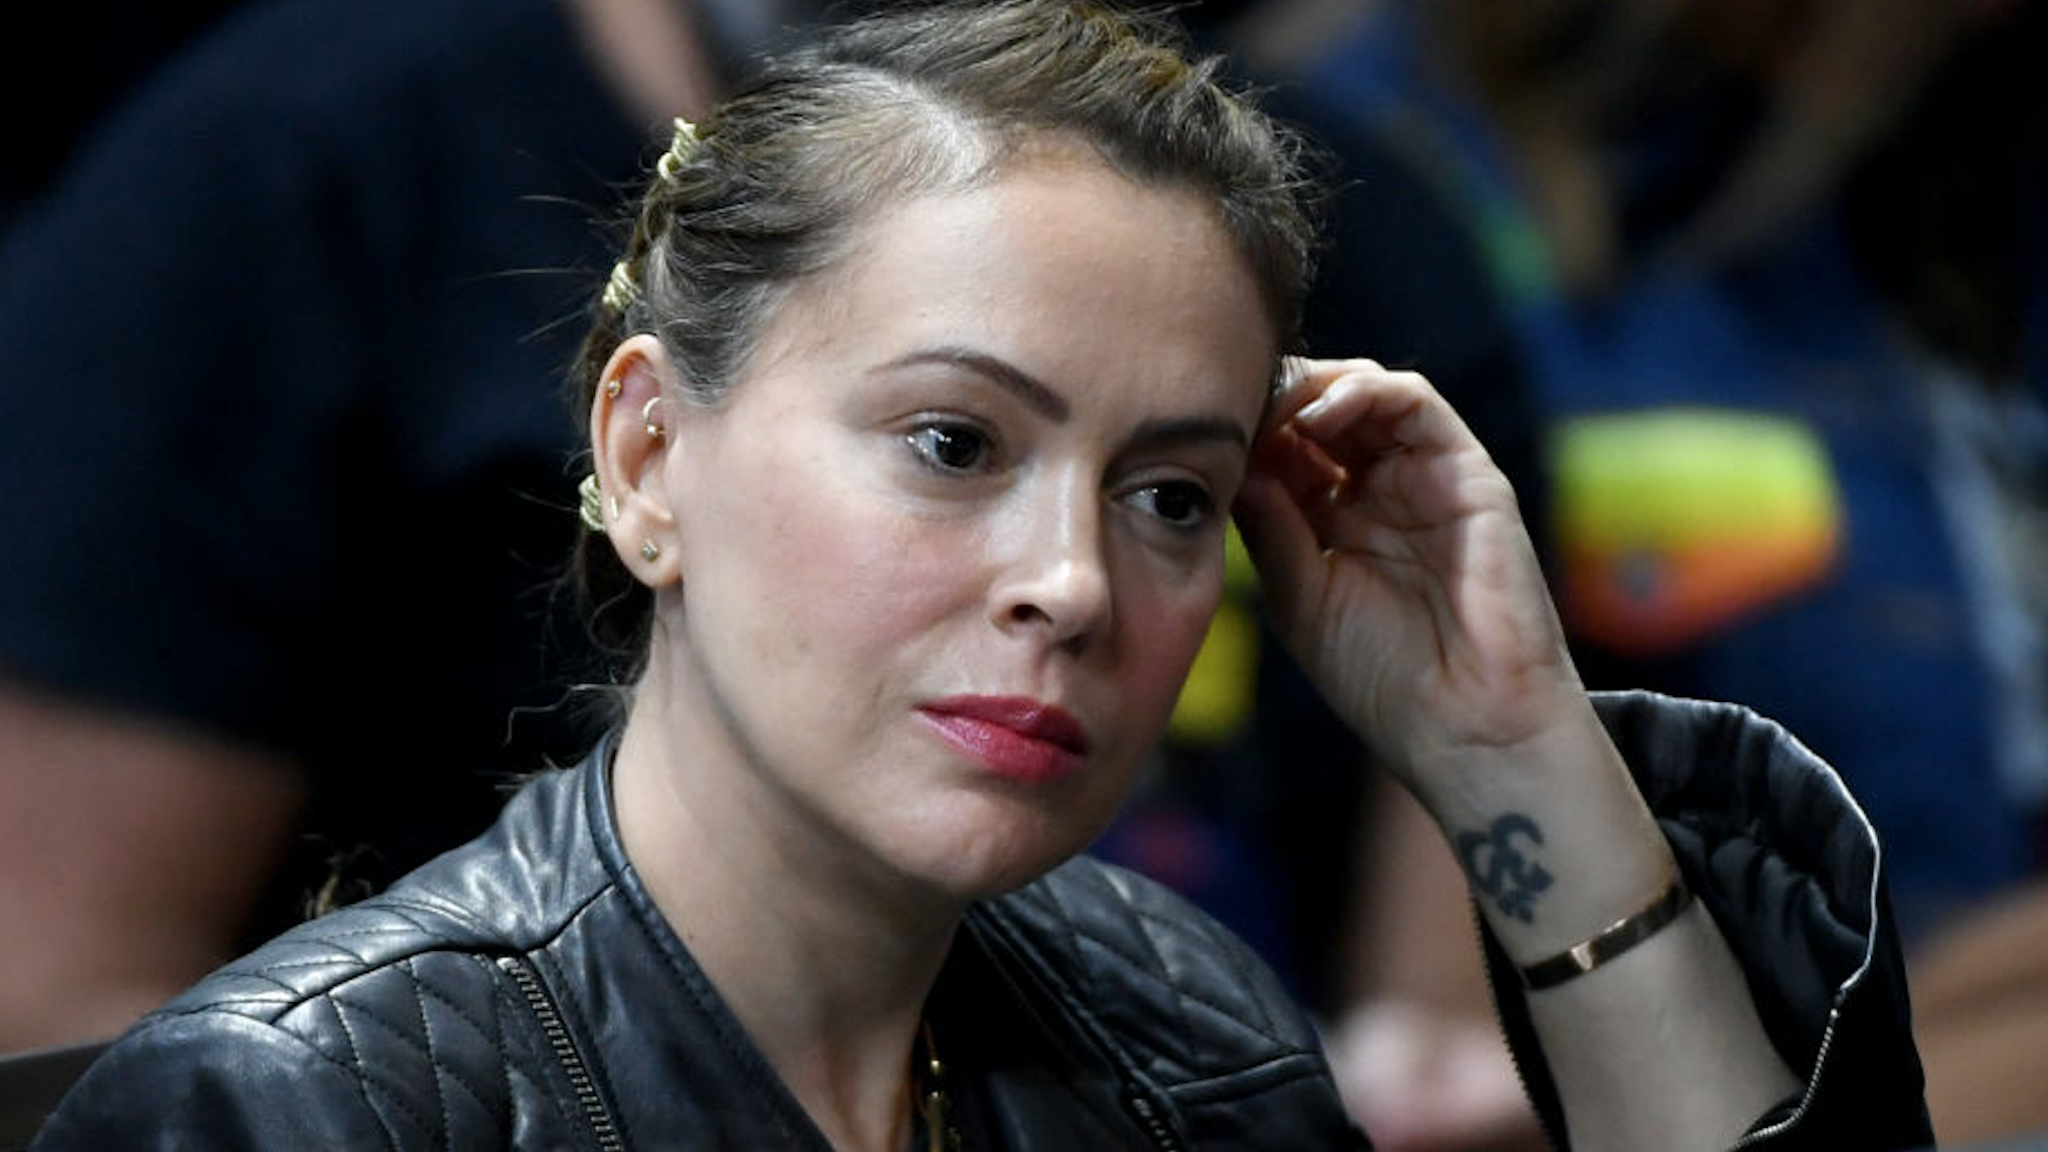 Actress Alyssa Milano attends the 2020 Gun Safety Forum hosted by gun control activist groups Giffords and March for Our Lives at Enclave on October 2, 2019 in Las Vegas, Nevada.